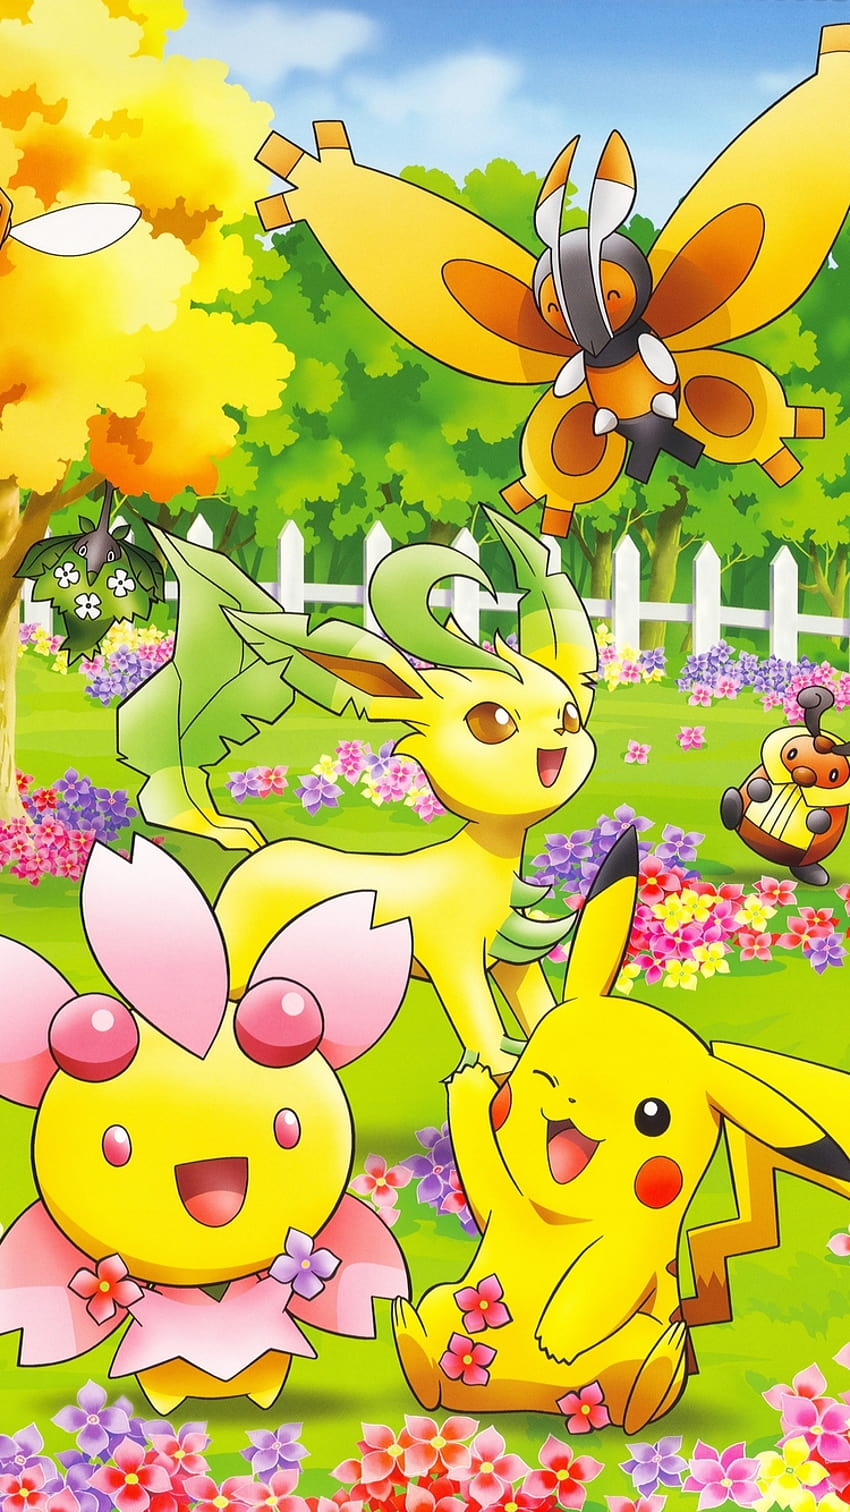 Cute Pokemon on iPhone 7 with Colorful Natures Backgrounds, iphone ...